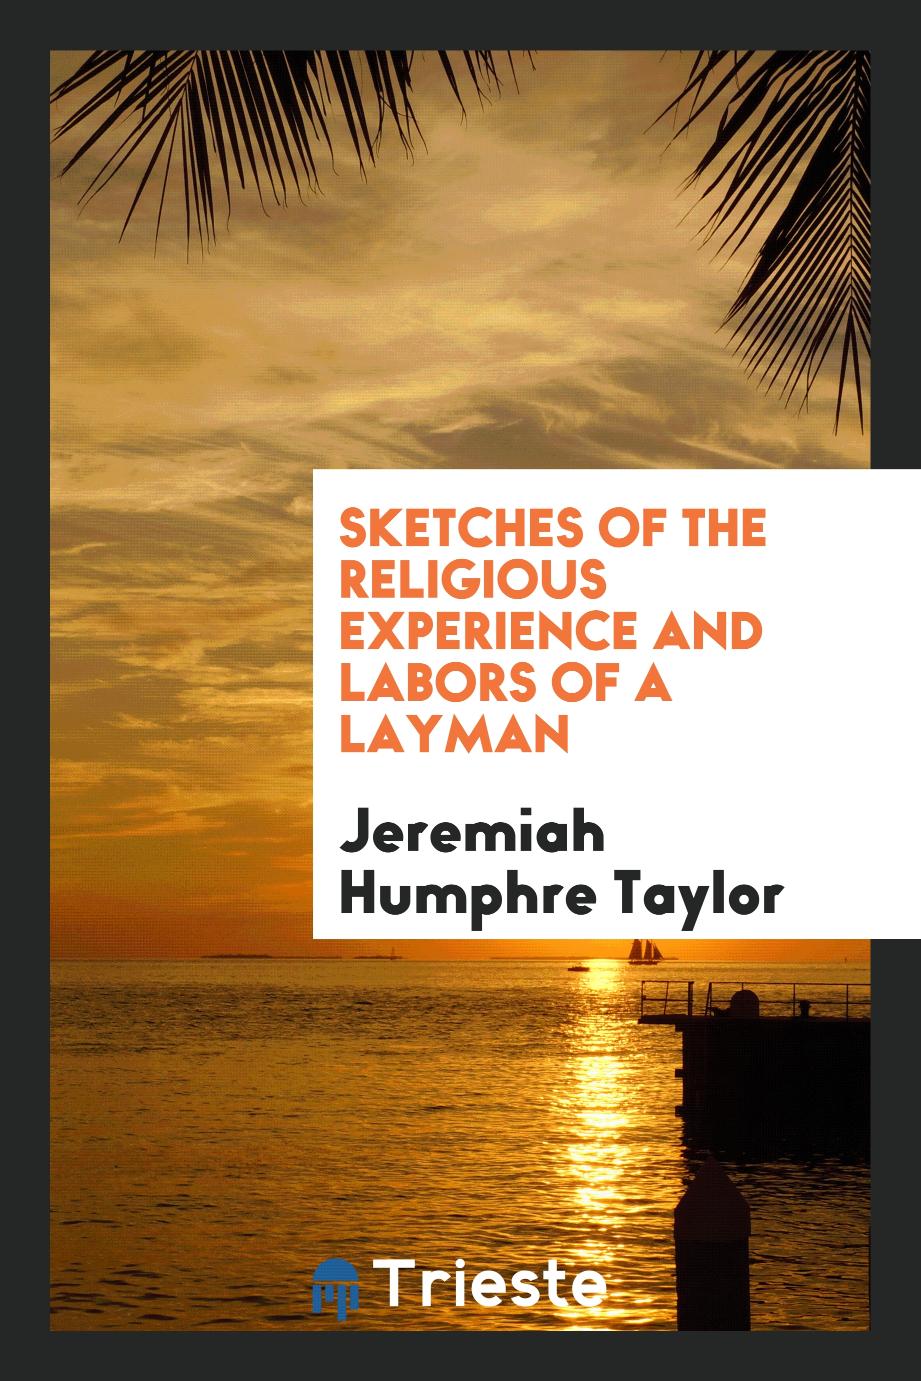 Sketches of the Religious Experience and Labors of a Layman